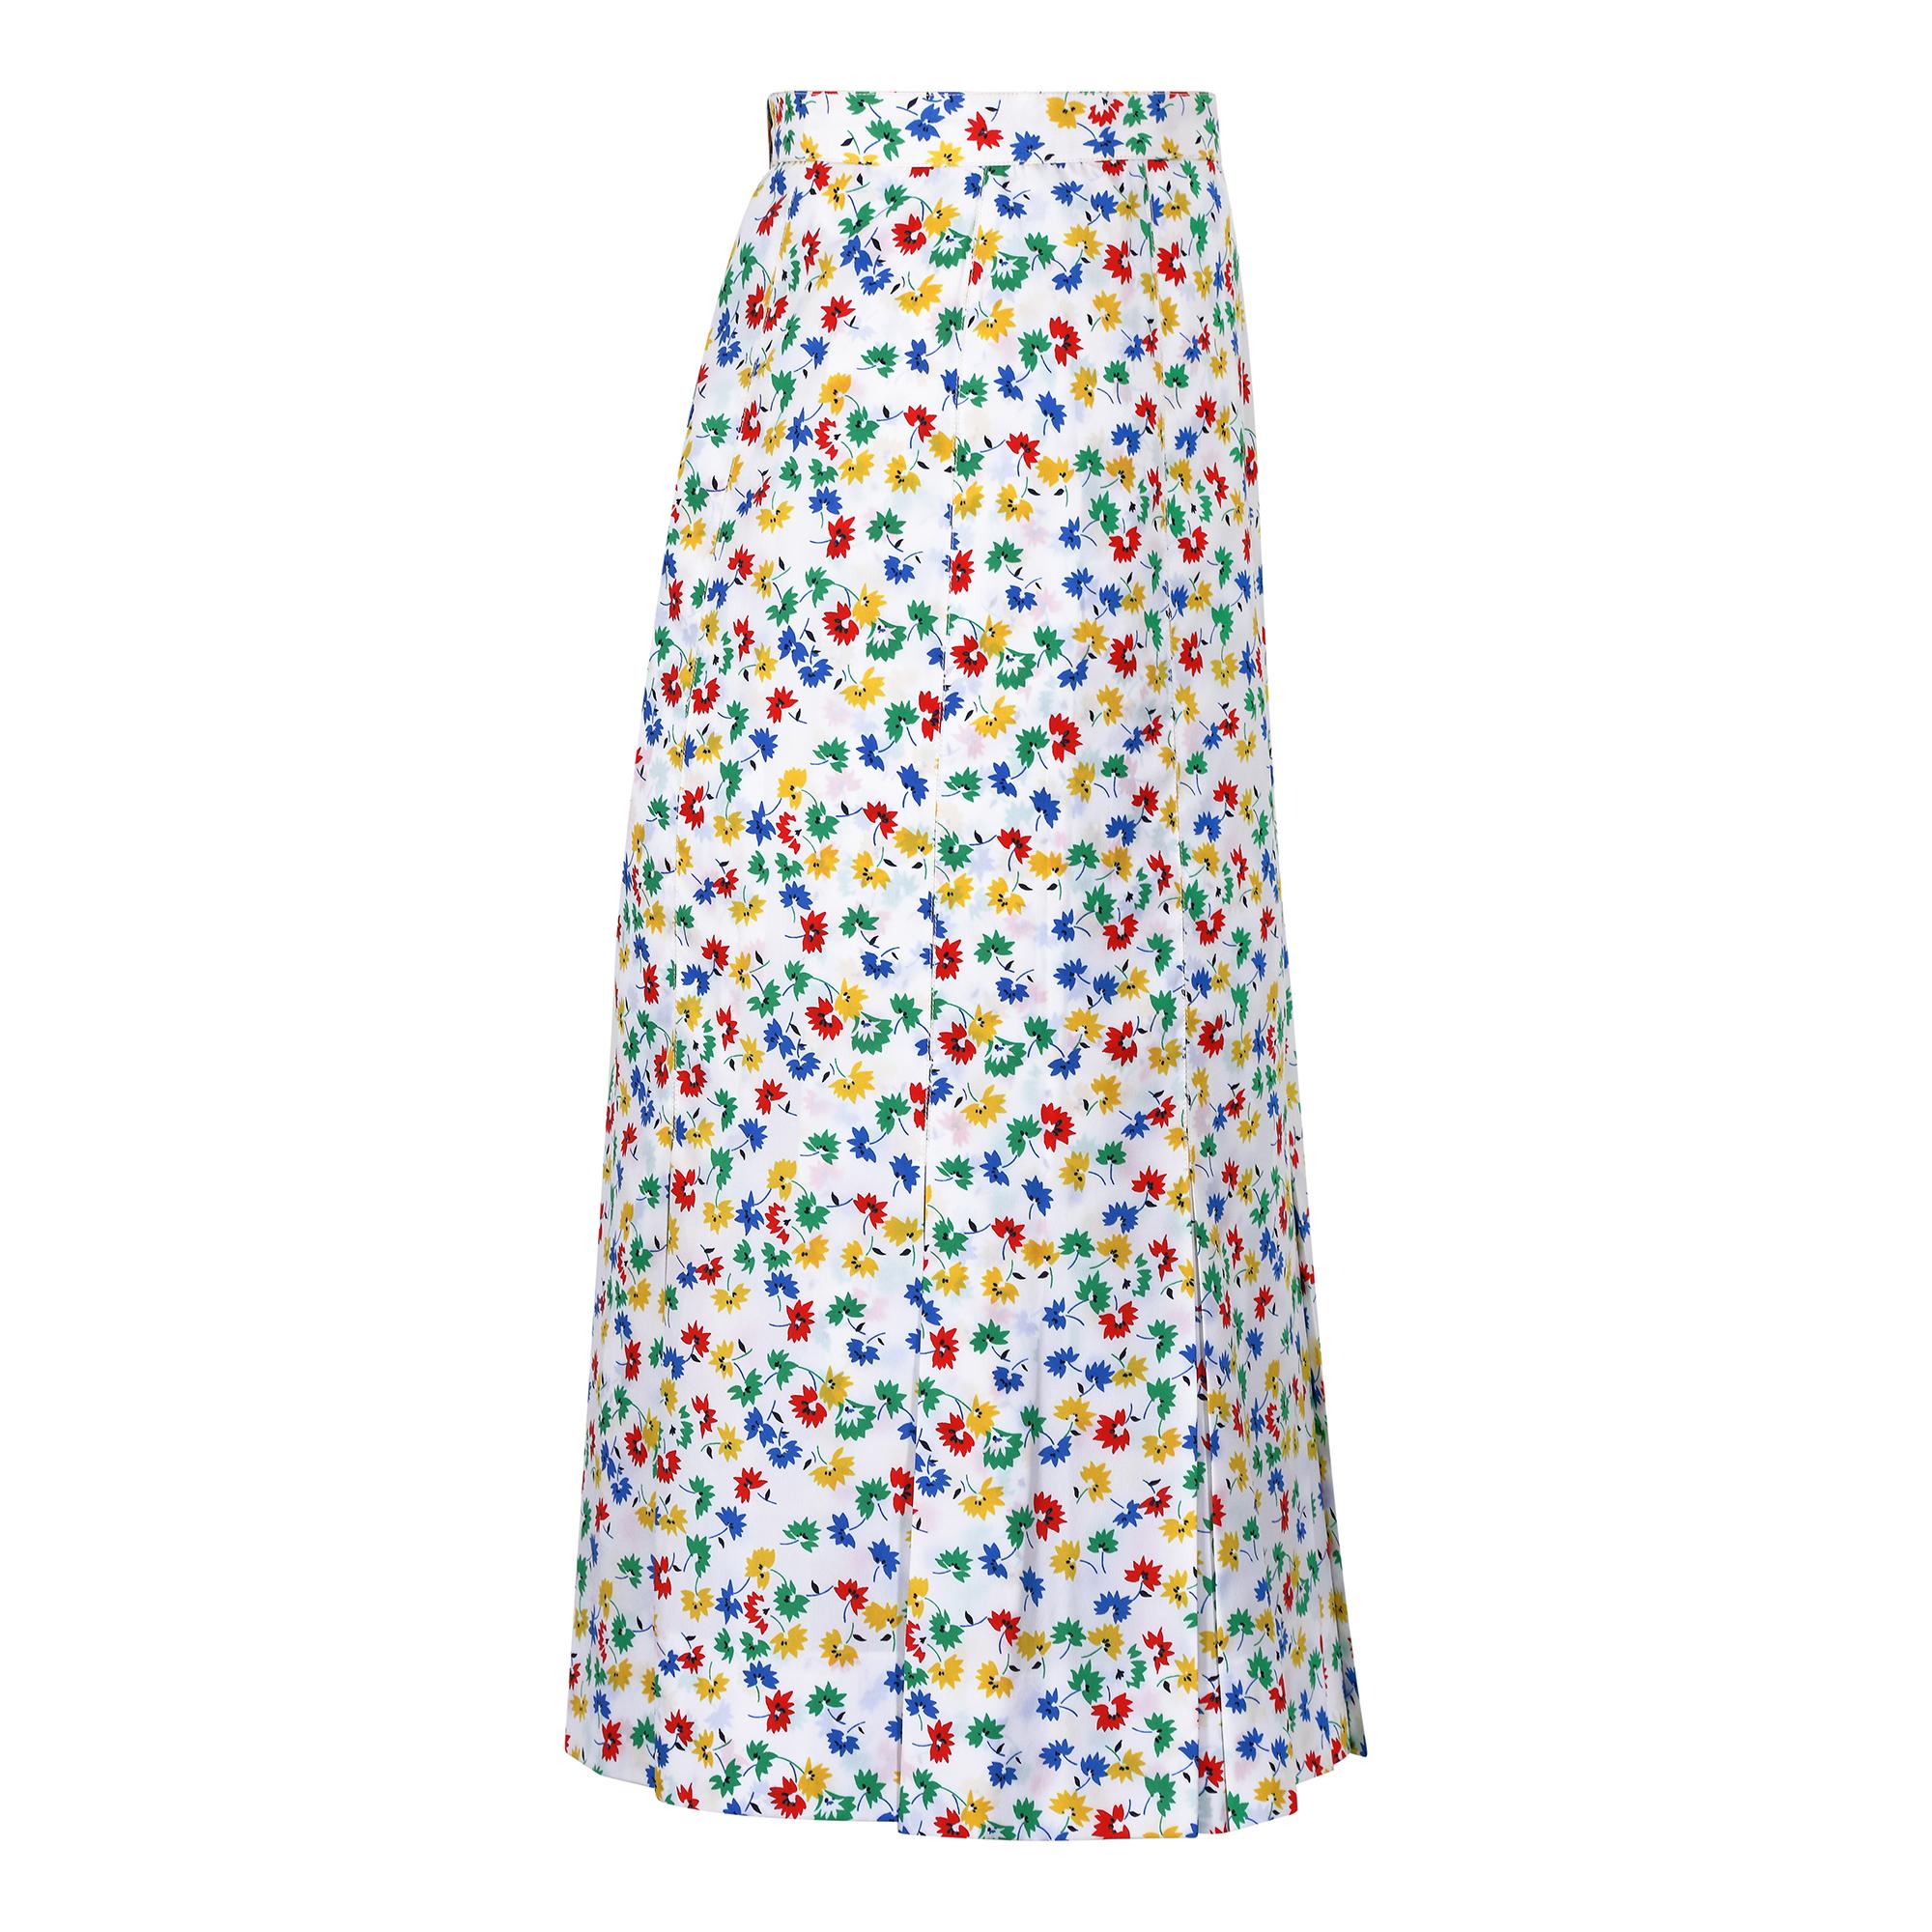 This 1970s or early 1980s Celine skirt has a very striking primary colour floral repeat print. The three-quarter length straight panelled skirt has for the remaining quarter, kick pleats forming the bottom hem which excite movement when worn and add